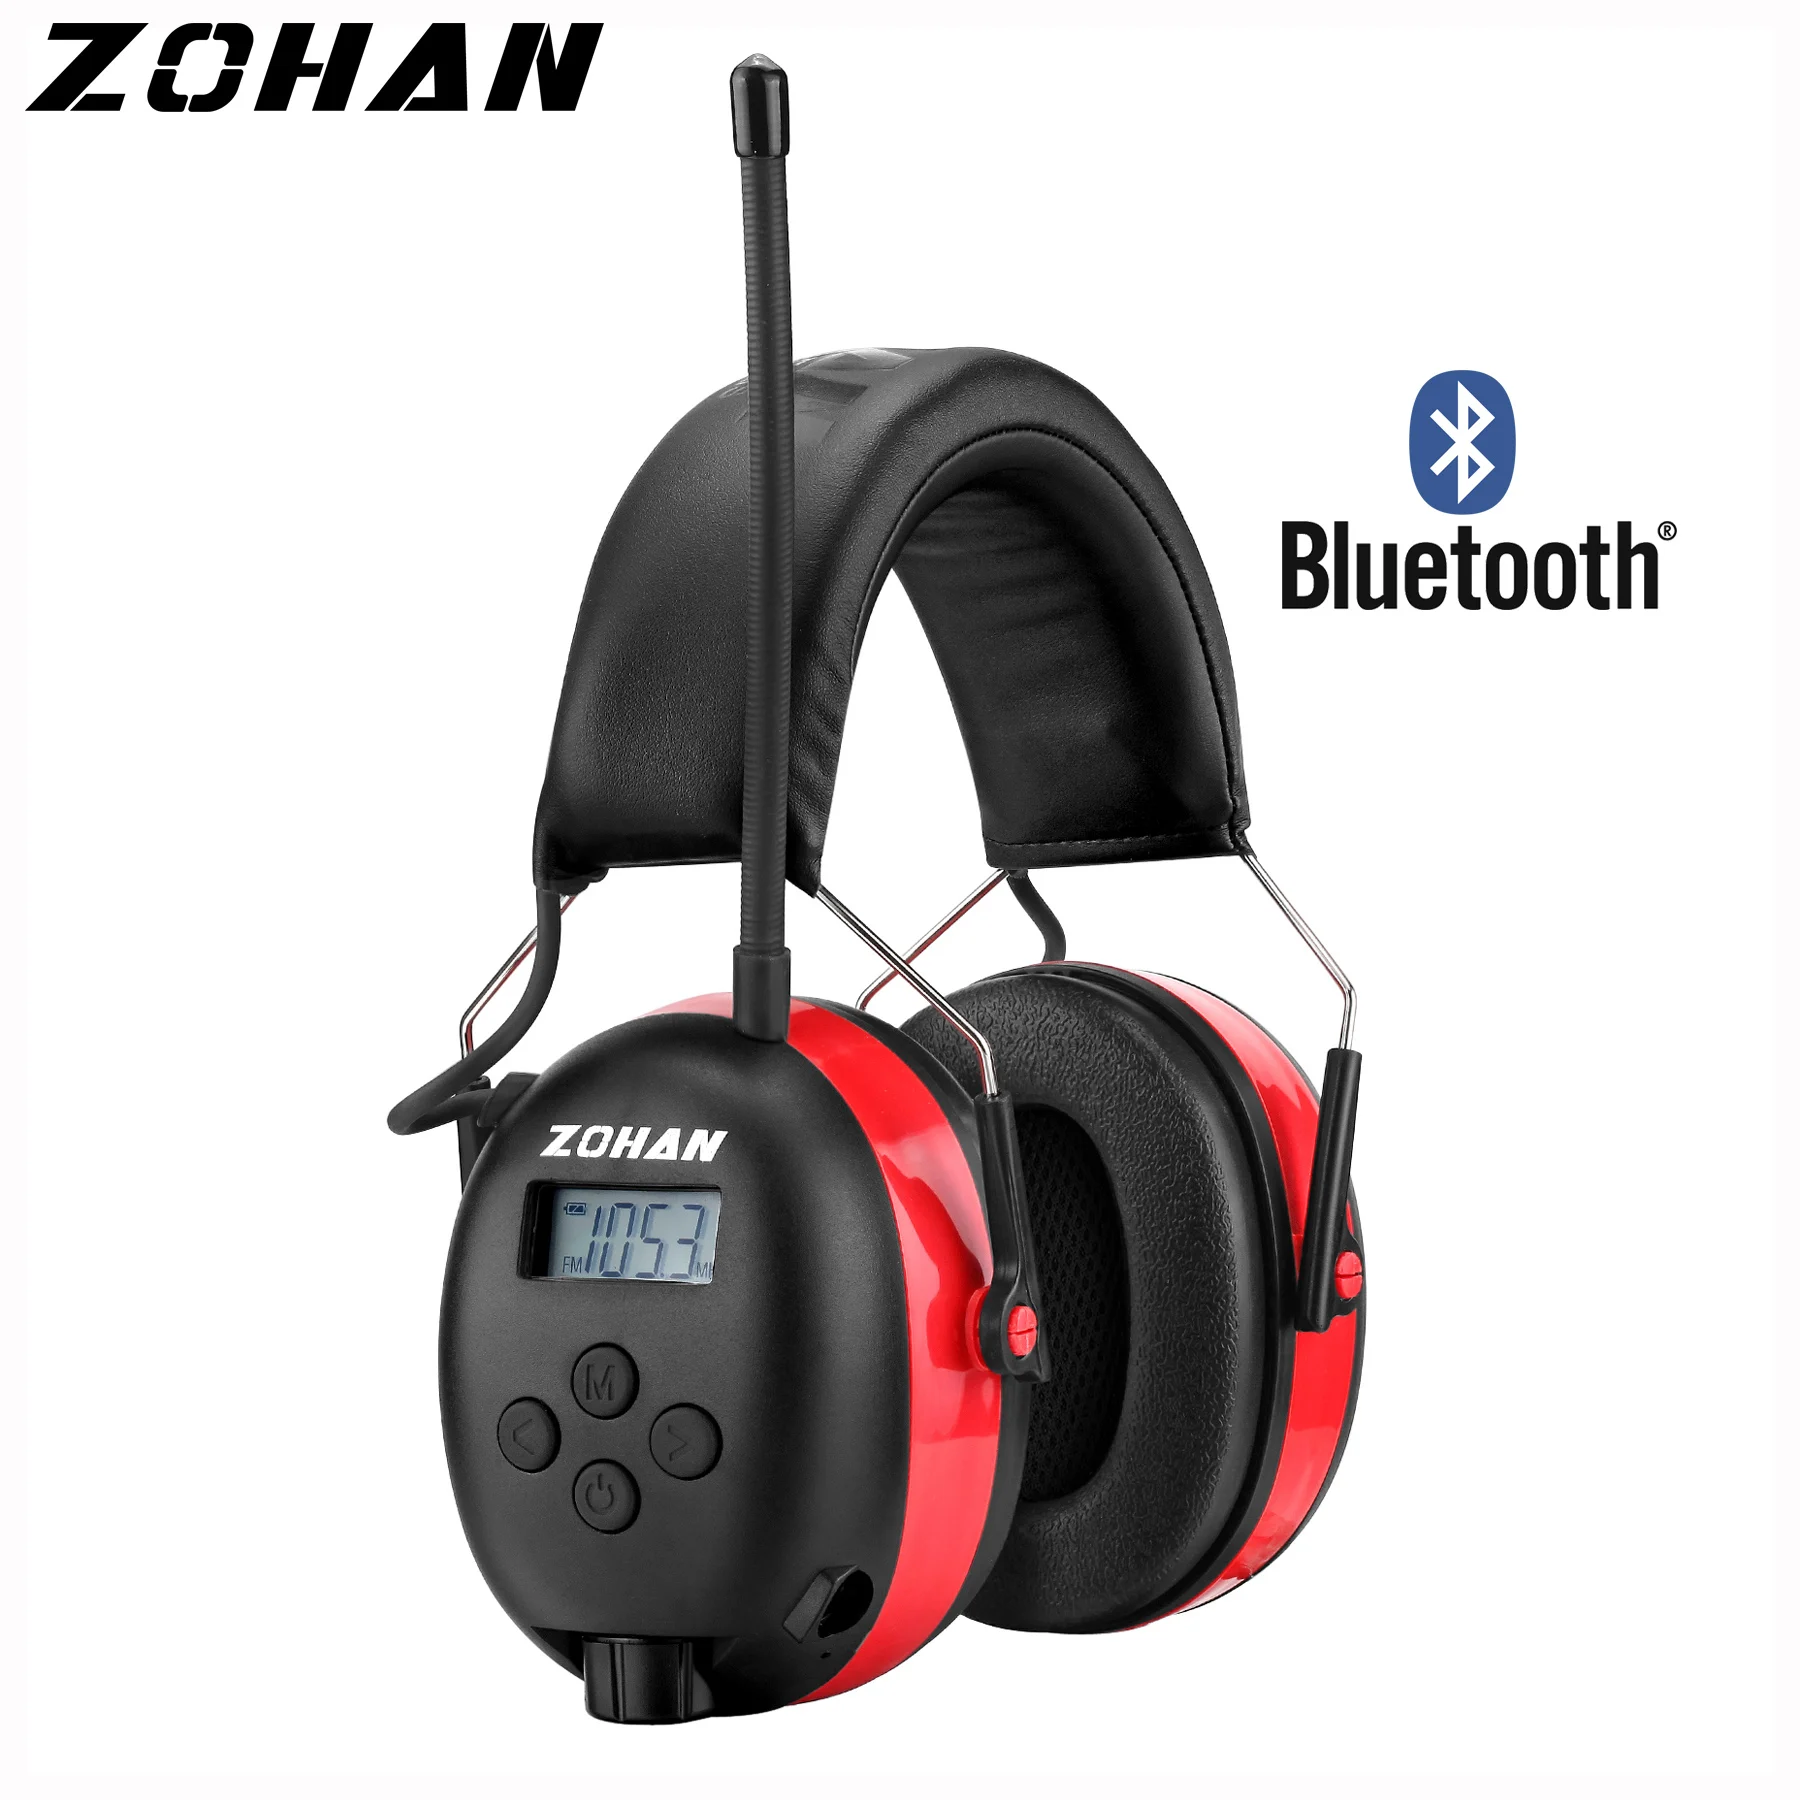 

ZOHAN Electronic Earmuffs 5.0 Bluetooth Headphone Ear Protection FM/AM Noise Reduction Hearing Protective for Mowing NRR25db